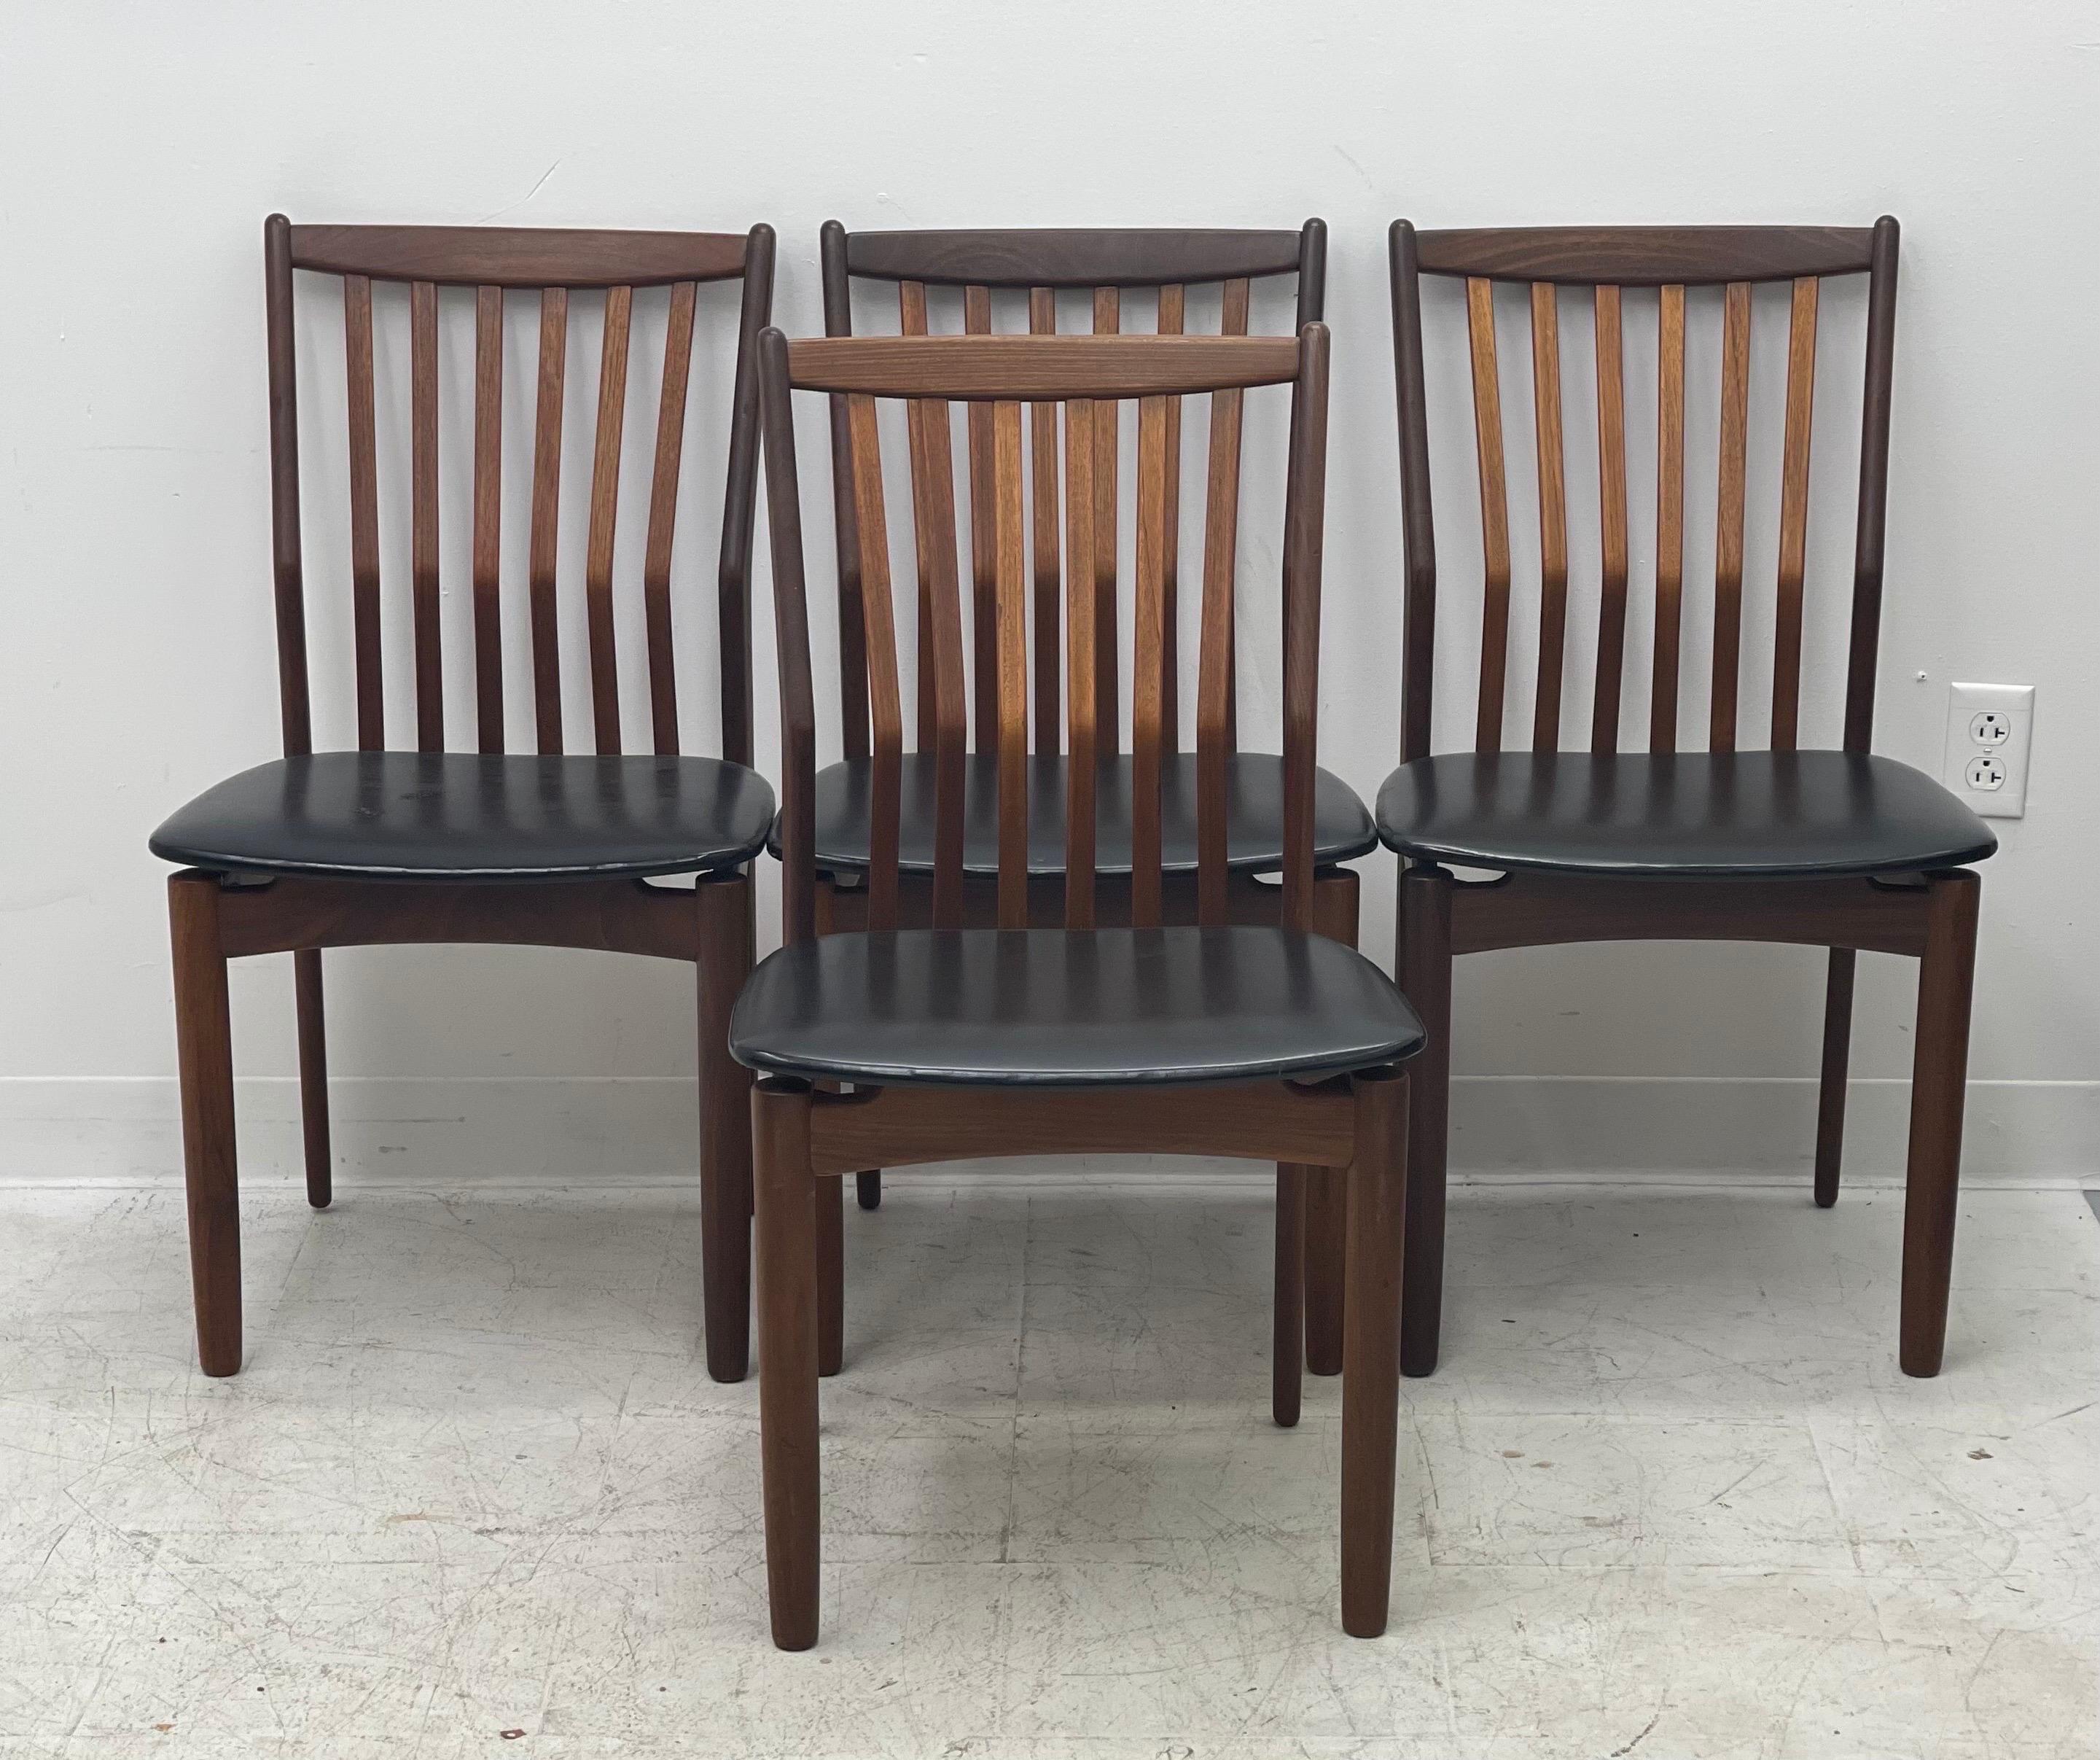 Mid-Century Modern set of four dining chairs in teak and afromasia, Denmark circa 1960’s. Features a supporting curved backrest and a wide frame seat unusual for Danish design. Retains the original black leatherette seats.

Dimensions: 19? W,